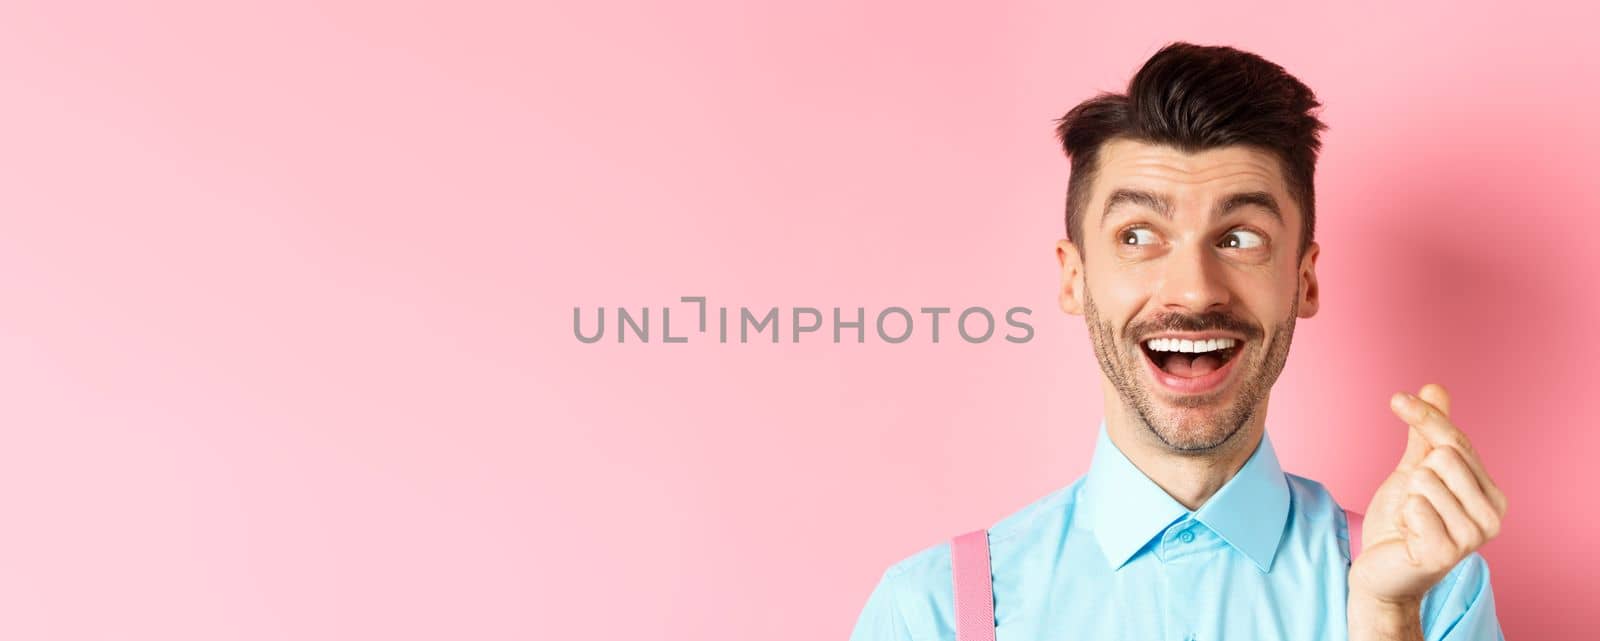 Valentines day concept. Romantic guy showing finger heart and looking left, smiling happy, standing on pink background dreamy.